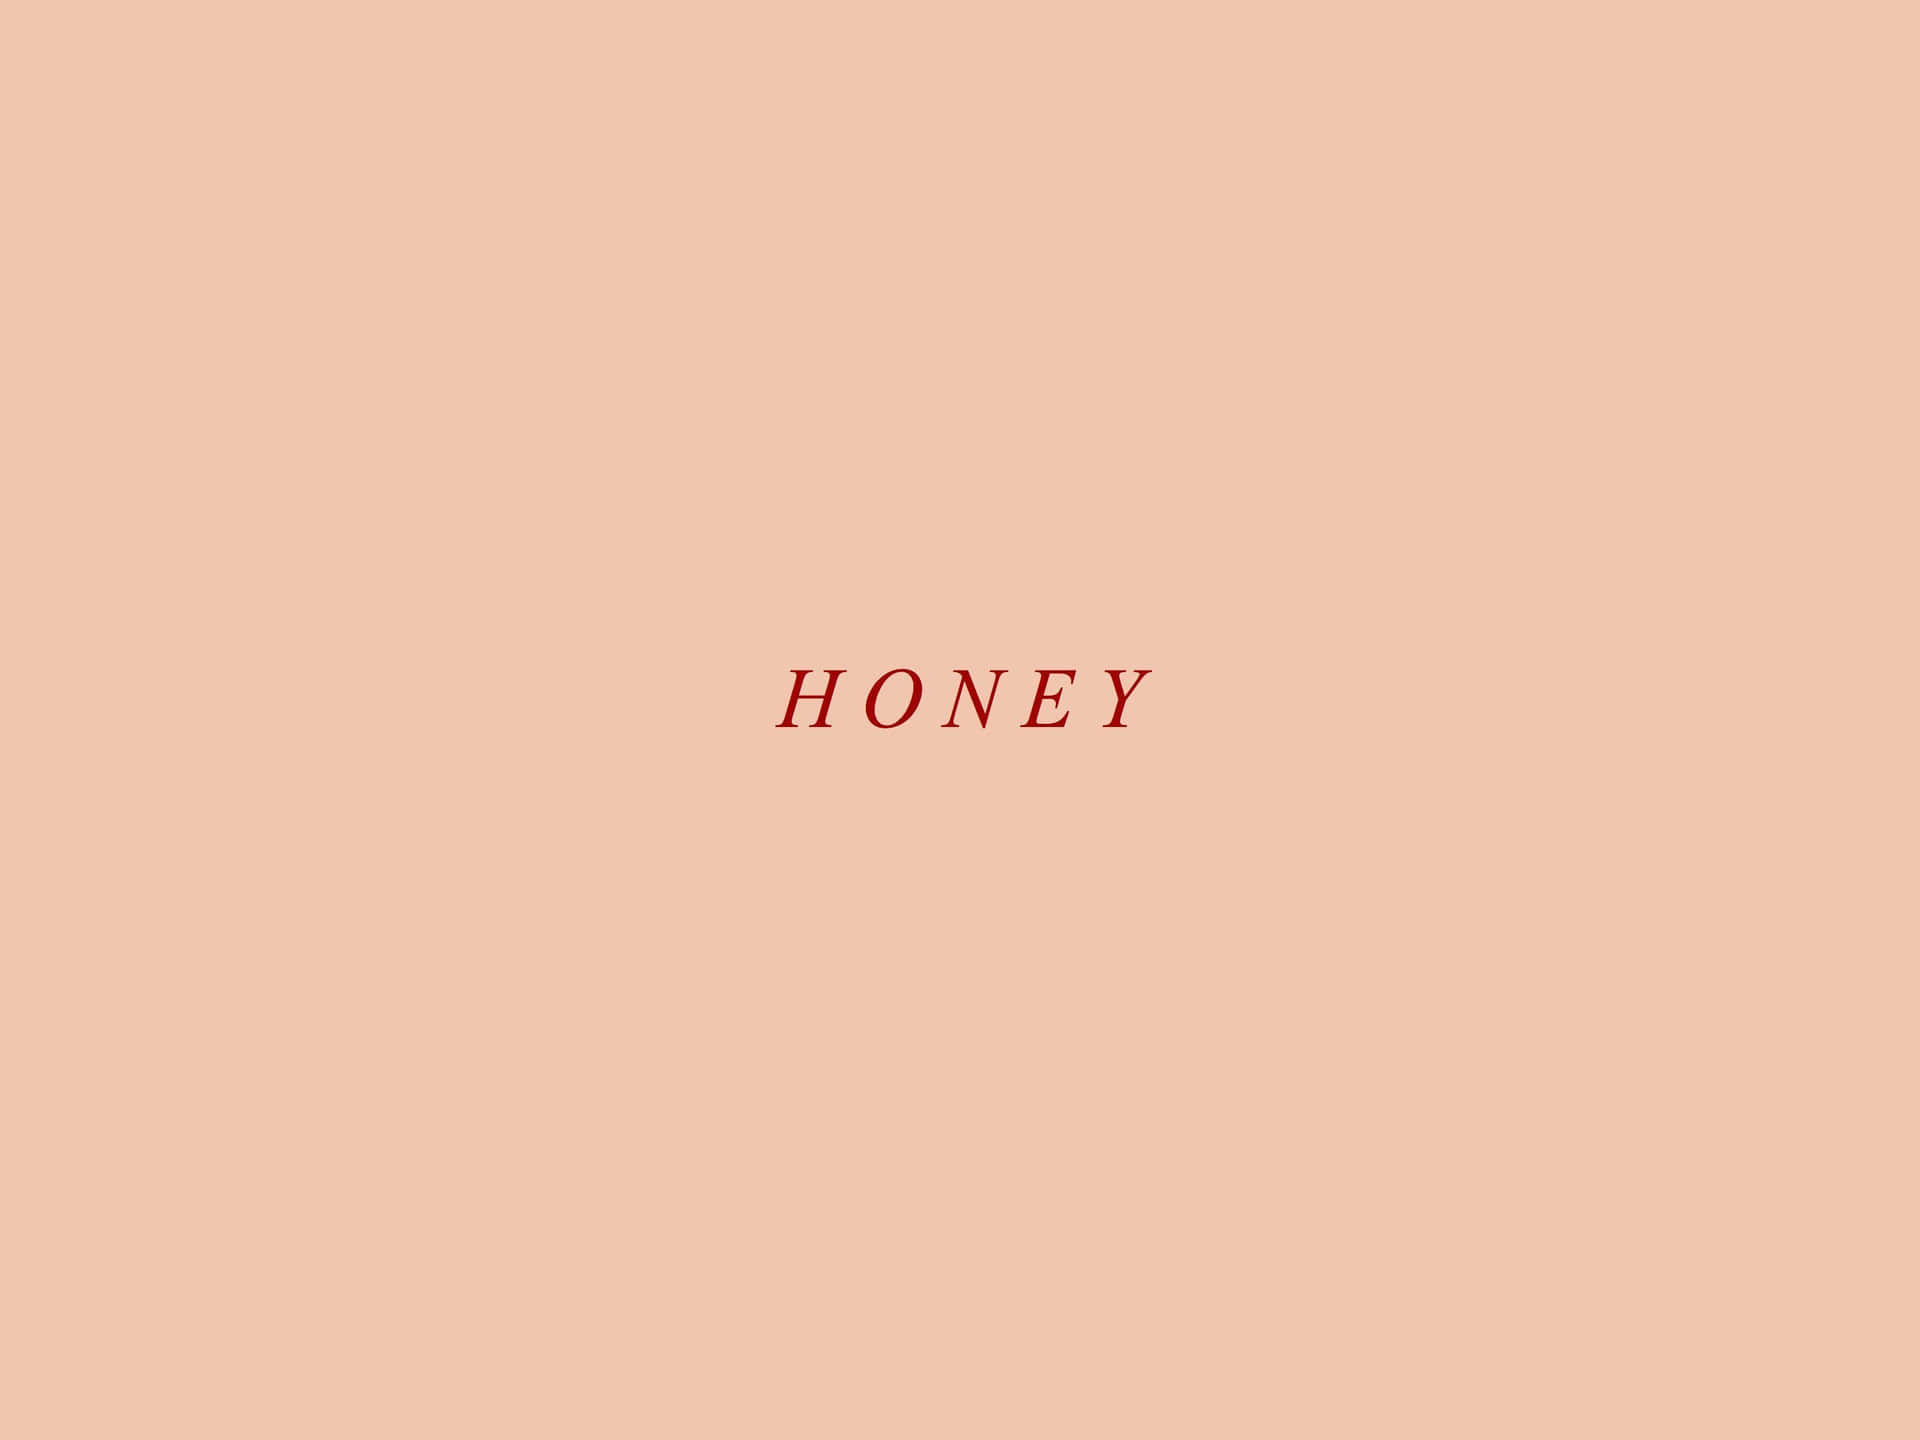 Honey - A Pink Background With The Word Honey Wallpaper